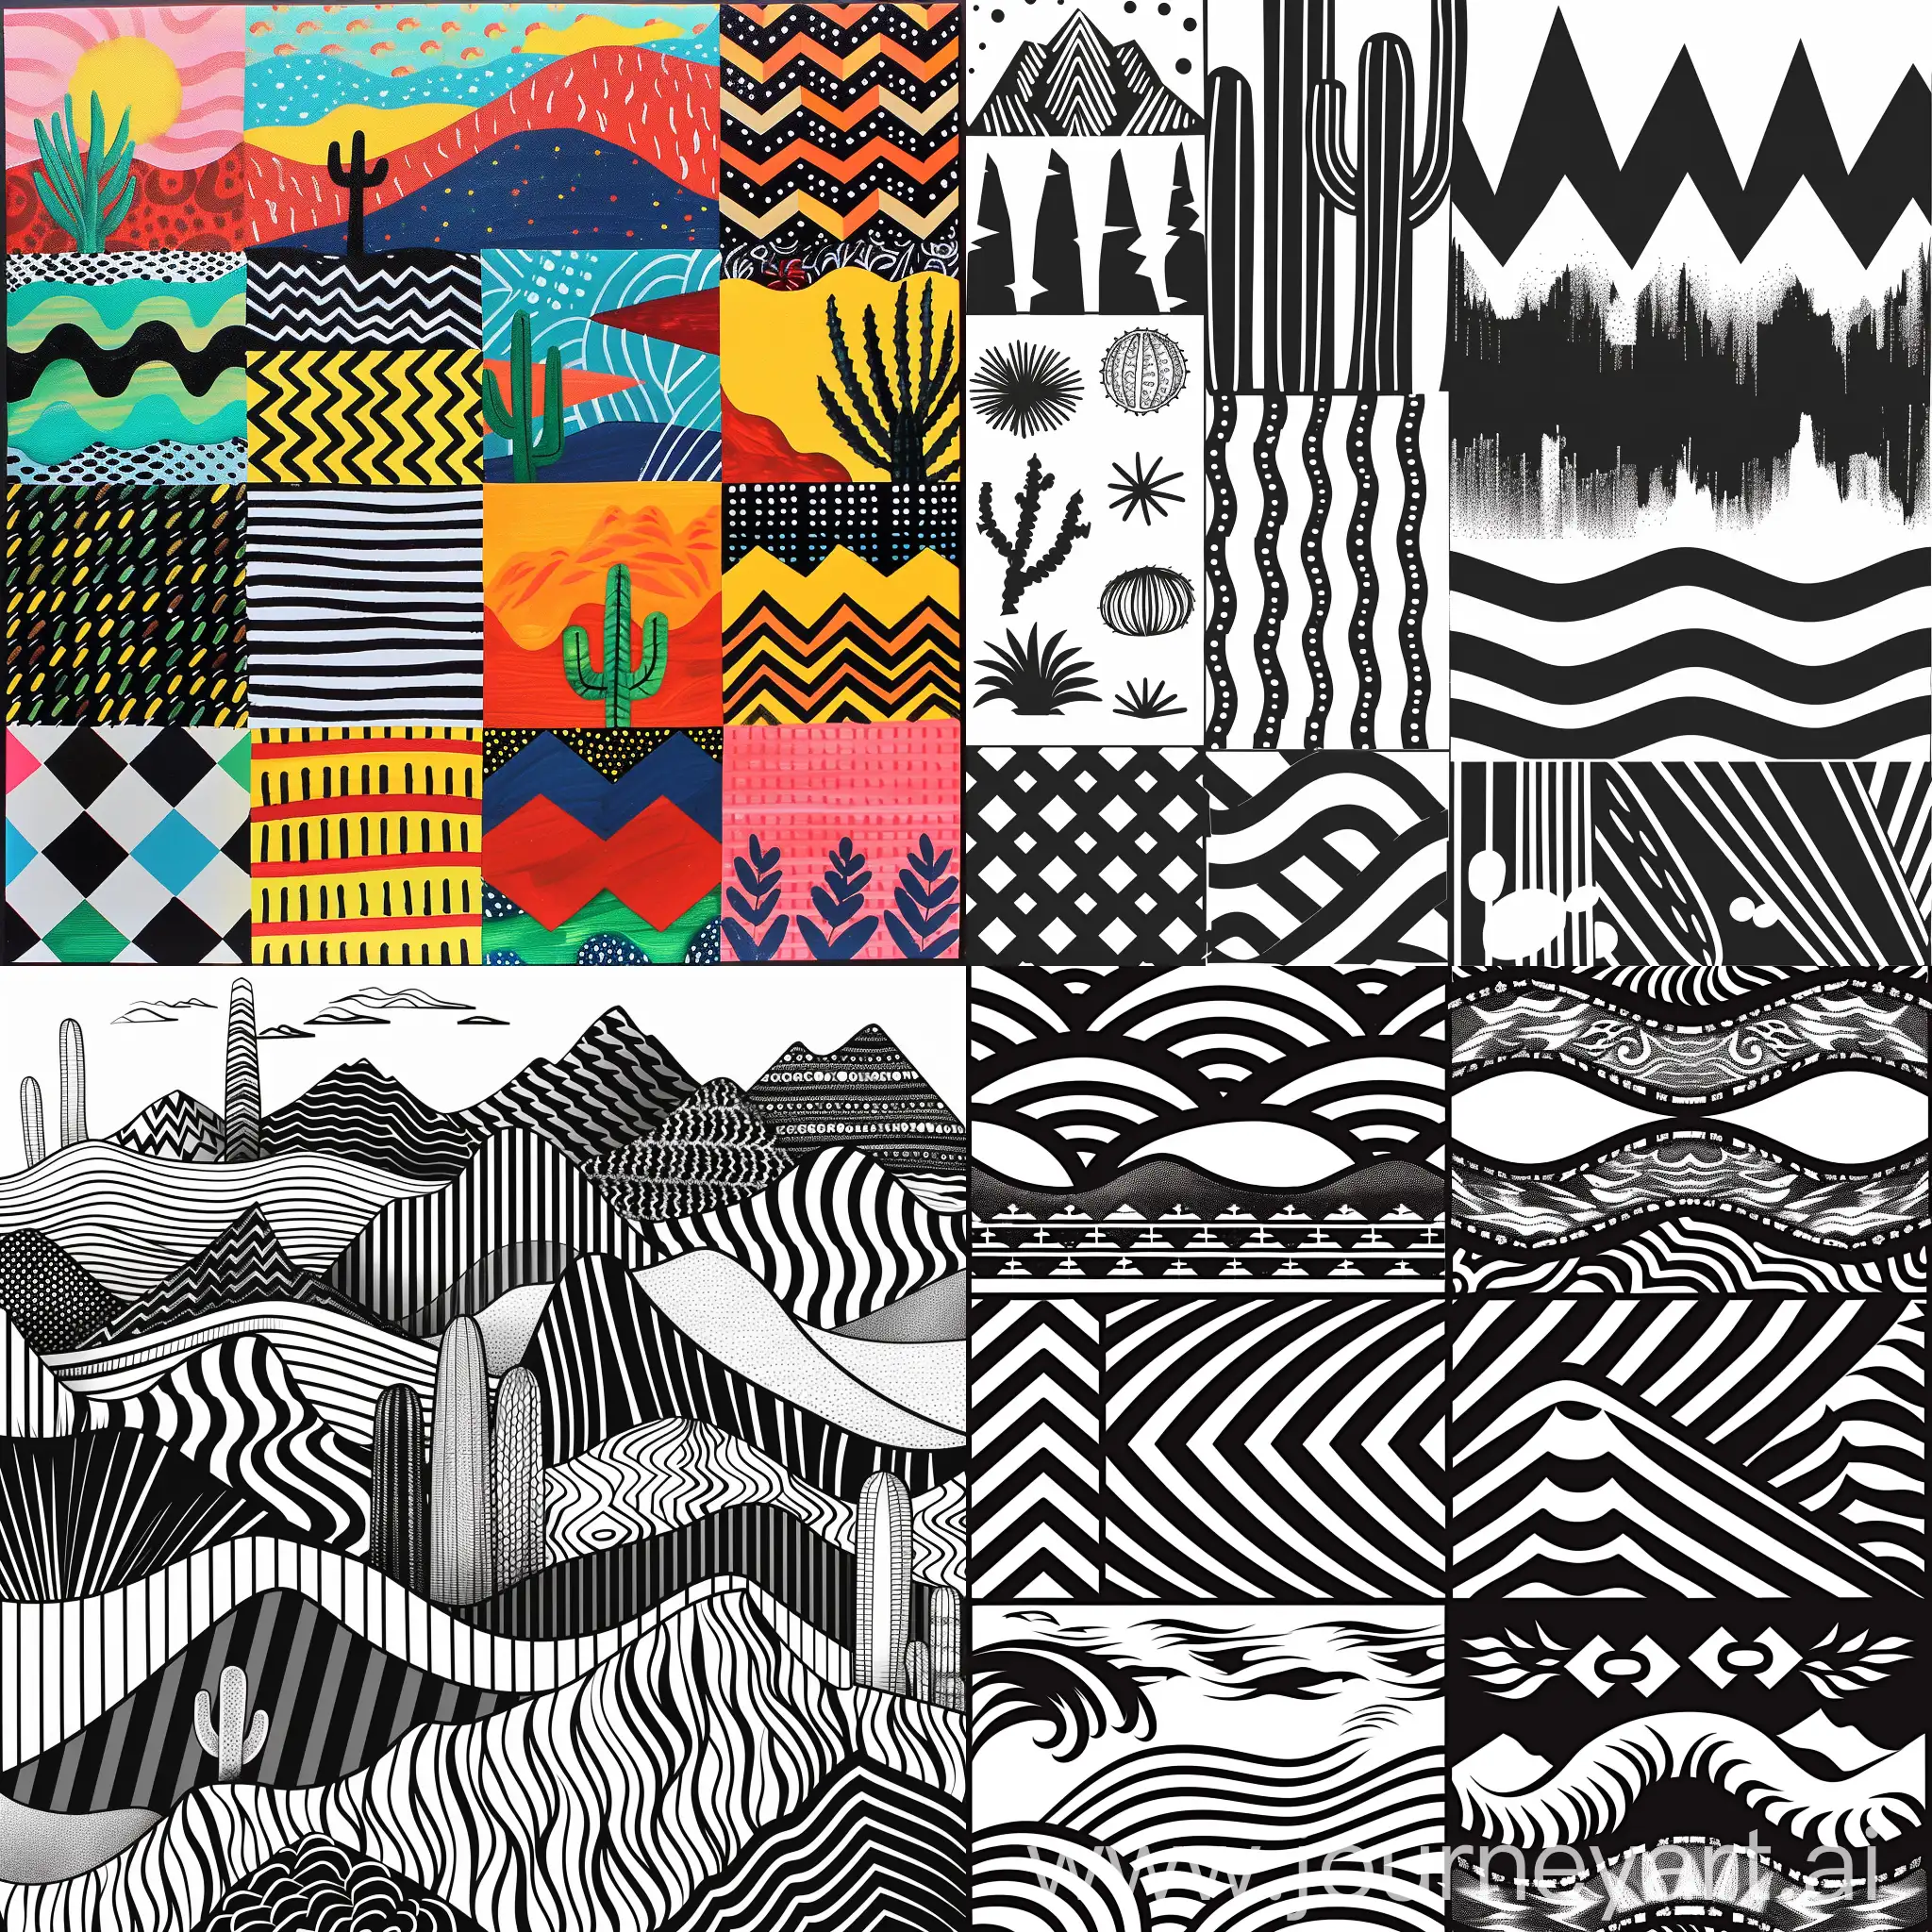 Desert-Geometric-Patterns-Replicable-Designs-for-Banknotes